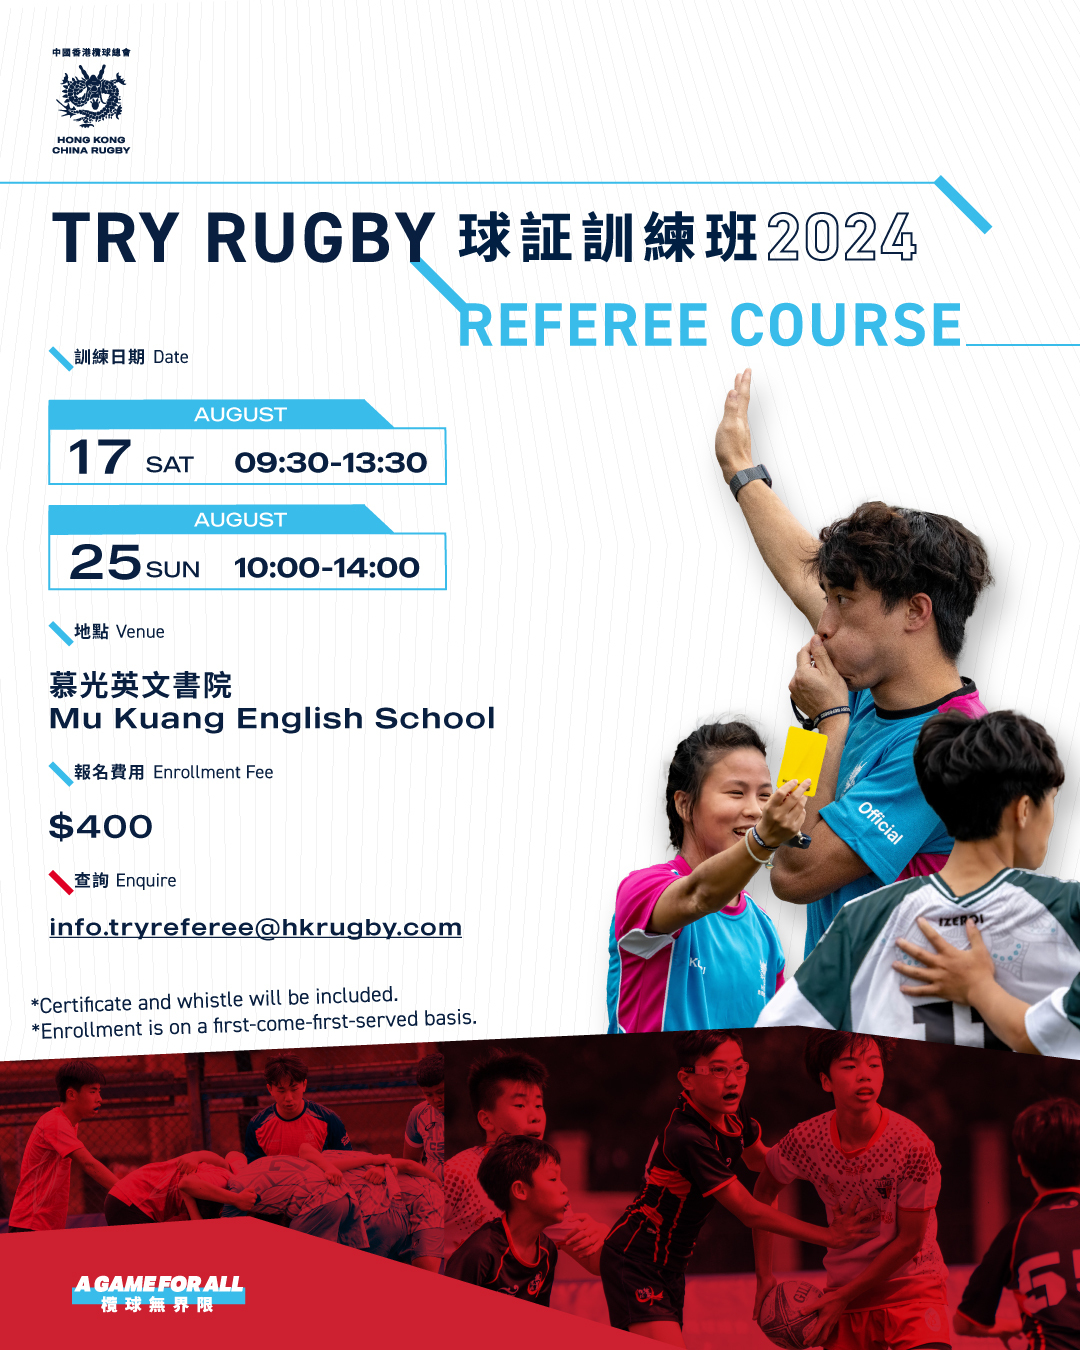 Try Rugby Referee Course 2024 thumbnail